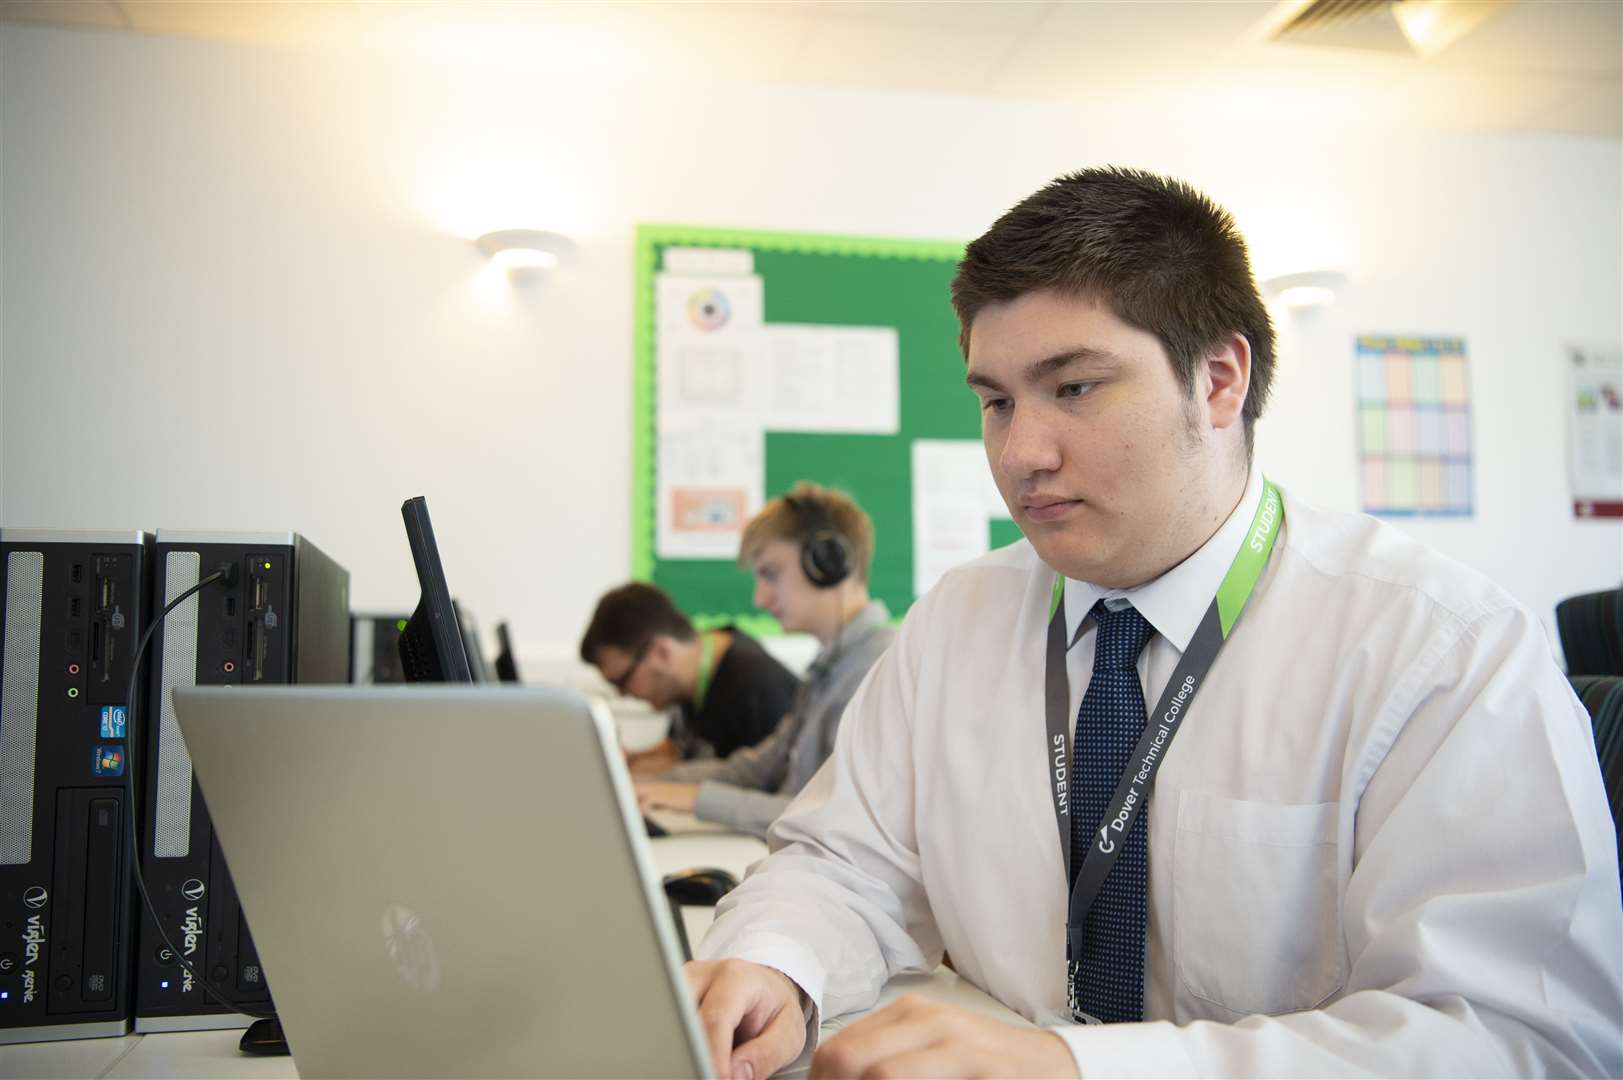 Dover Technical College is the only education provider in the are offering a T Level in Digital Support